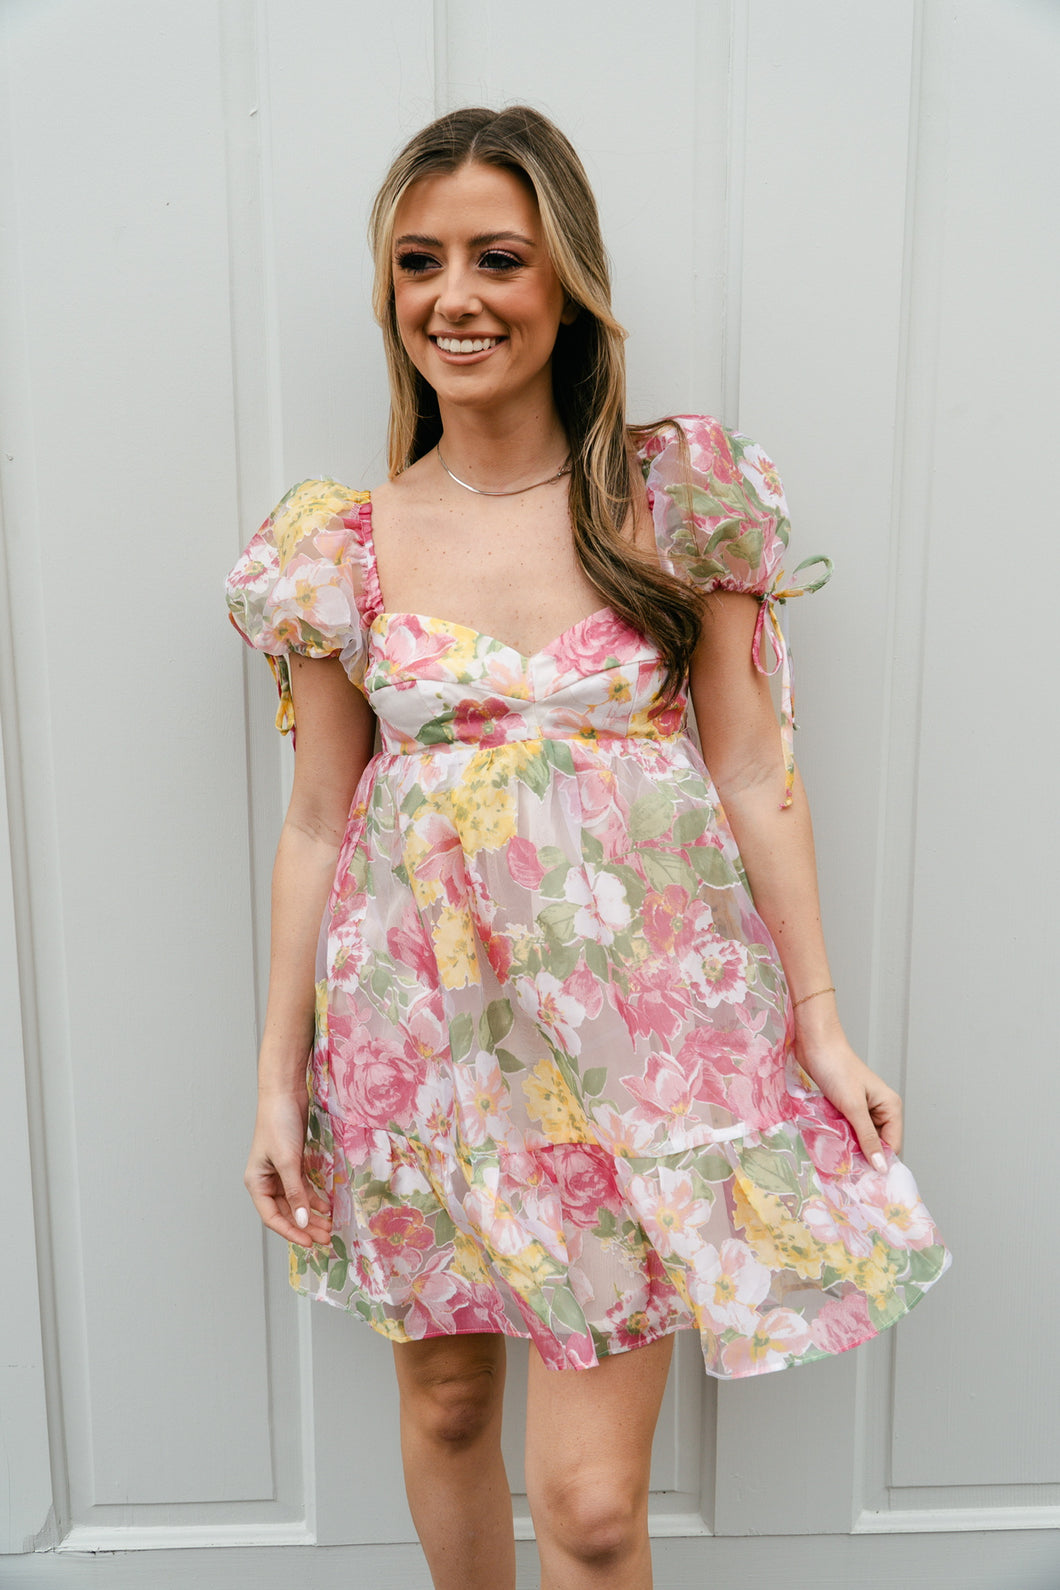 Garden Party Baby Doll Dress